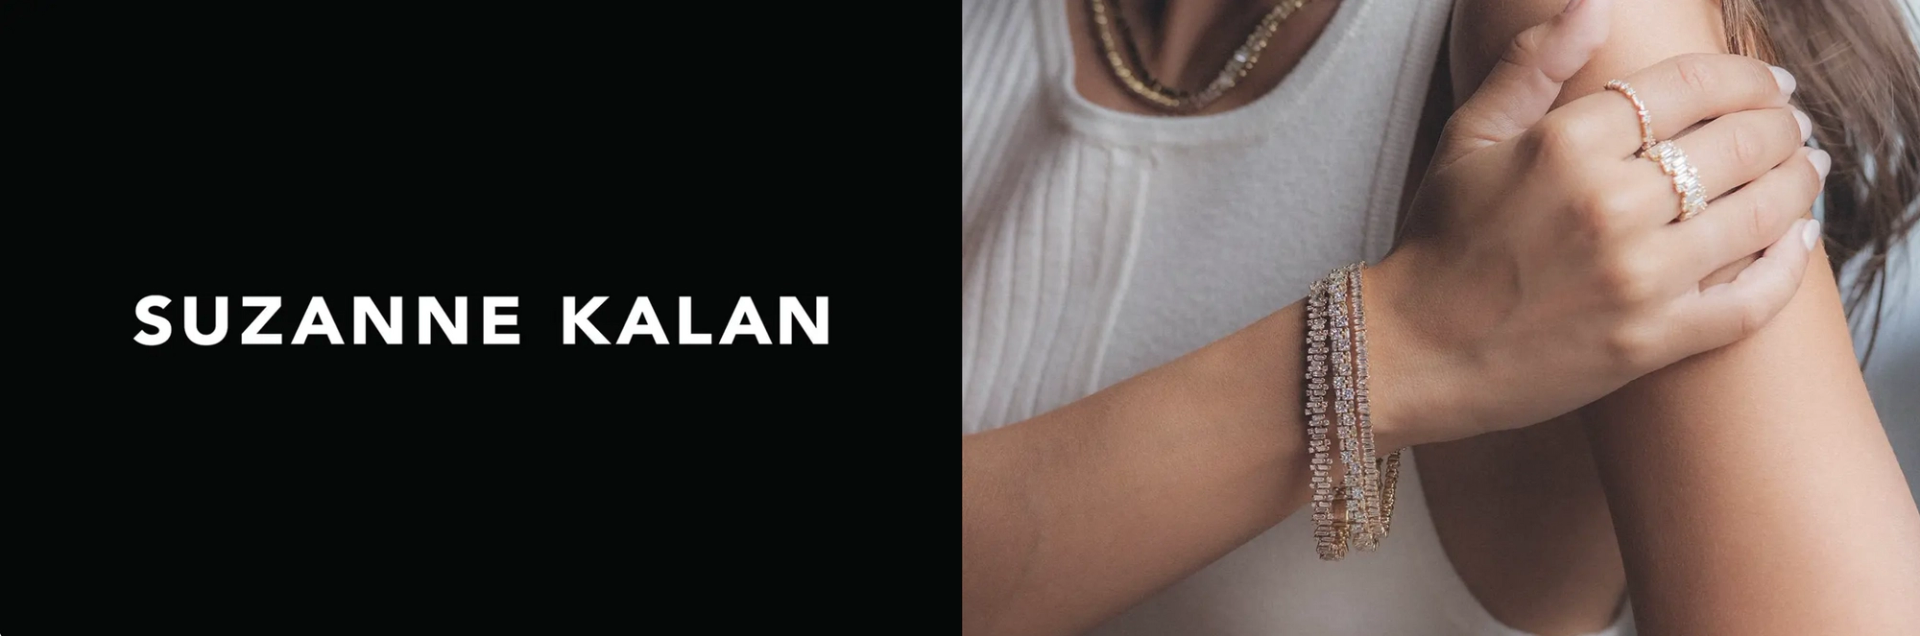 Suzanne Kalan campaign by Superside